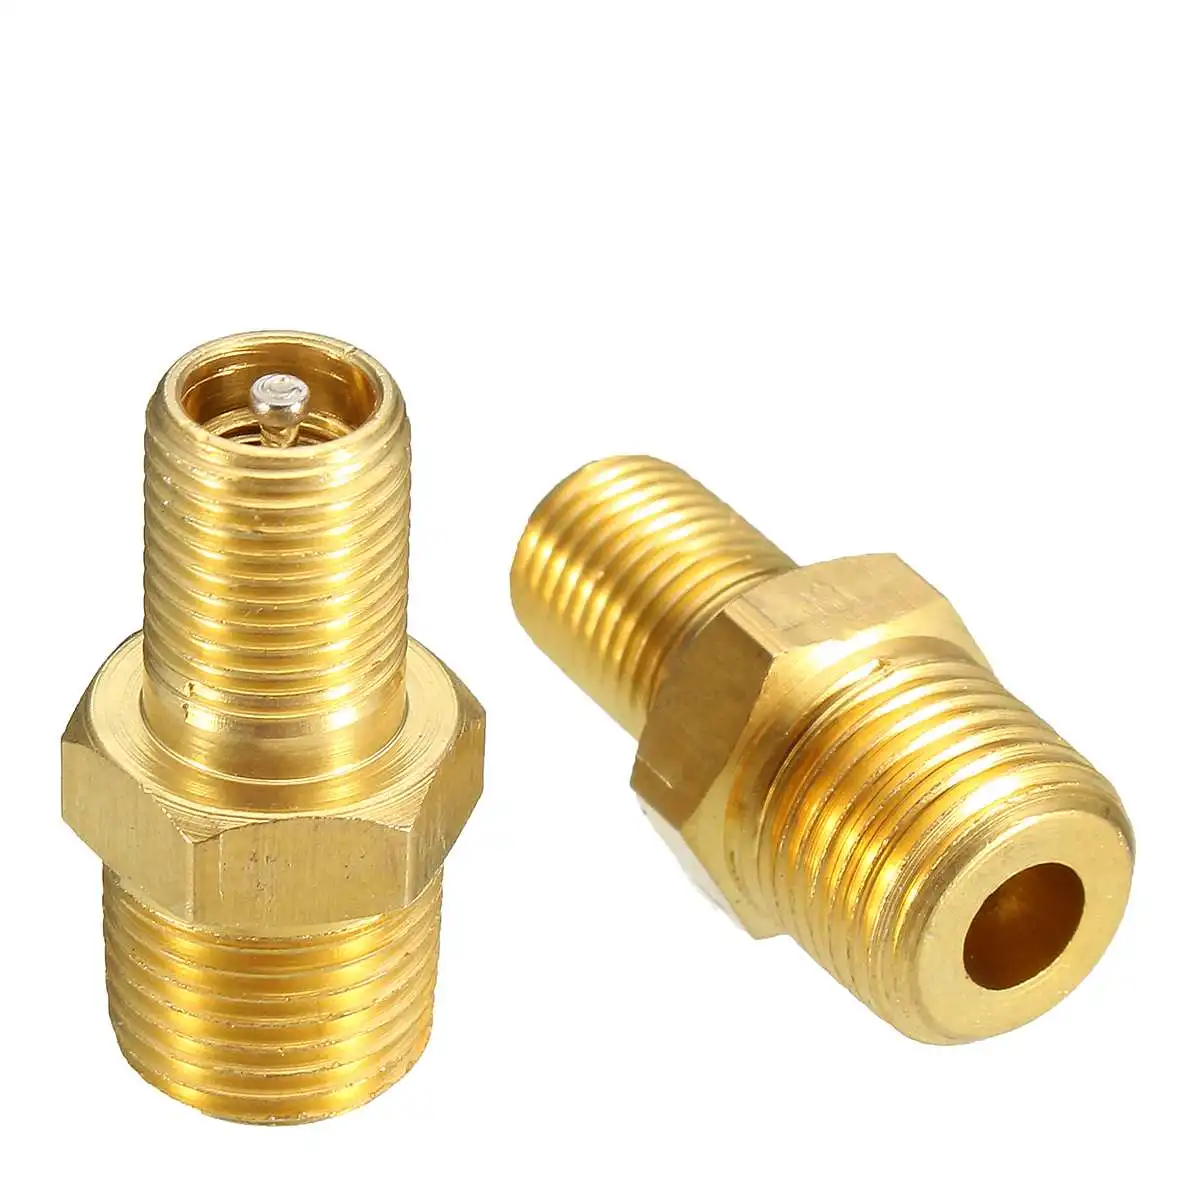 4x 1/4 Male MPT Solid Brass Air Compressor Tank Fill Valve Schrader-Fittings